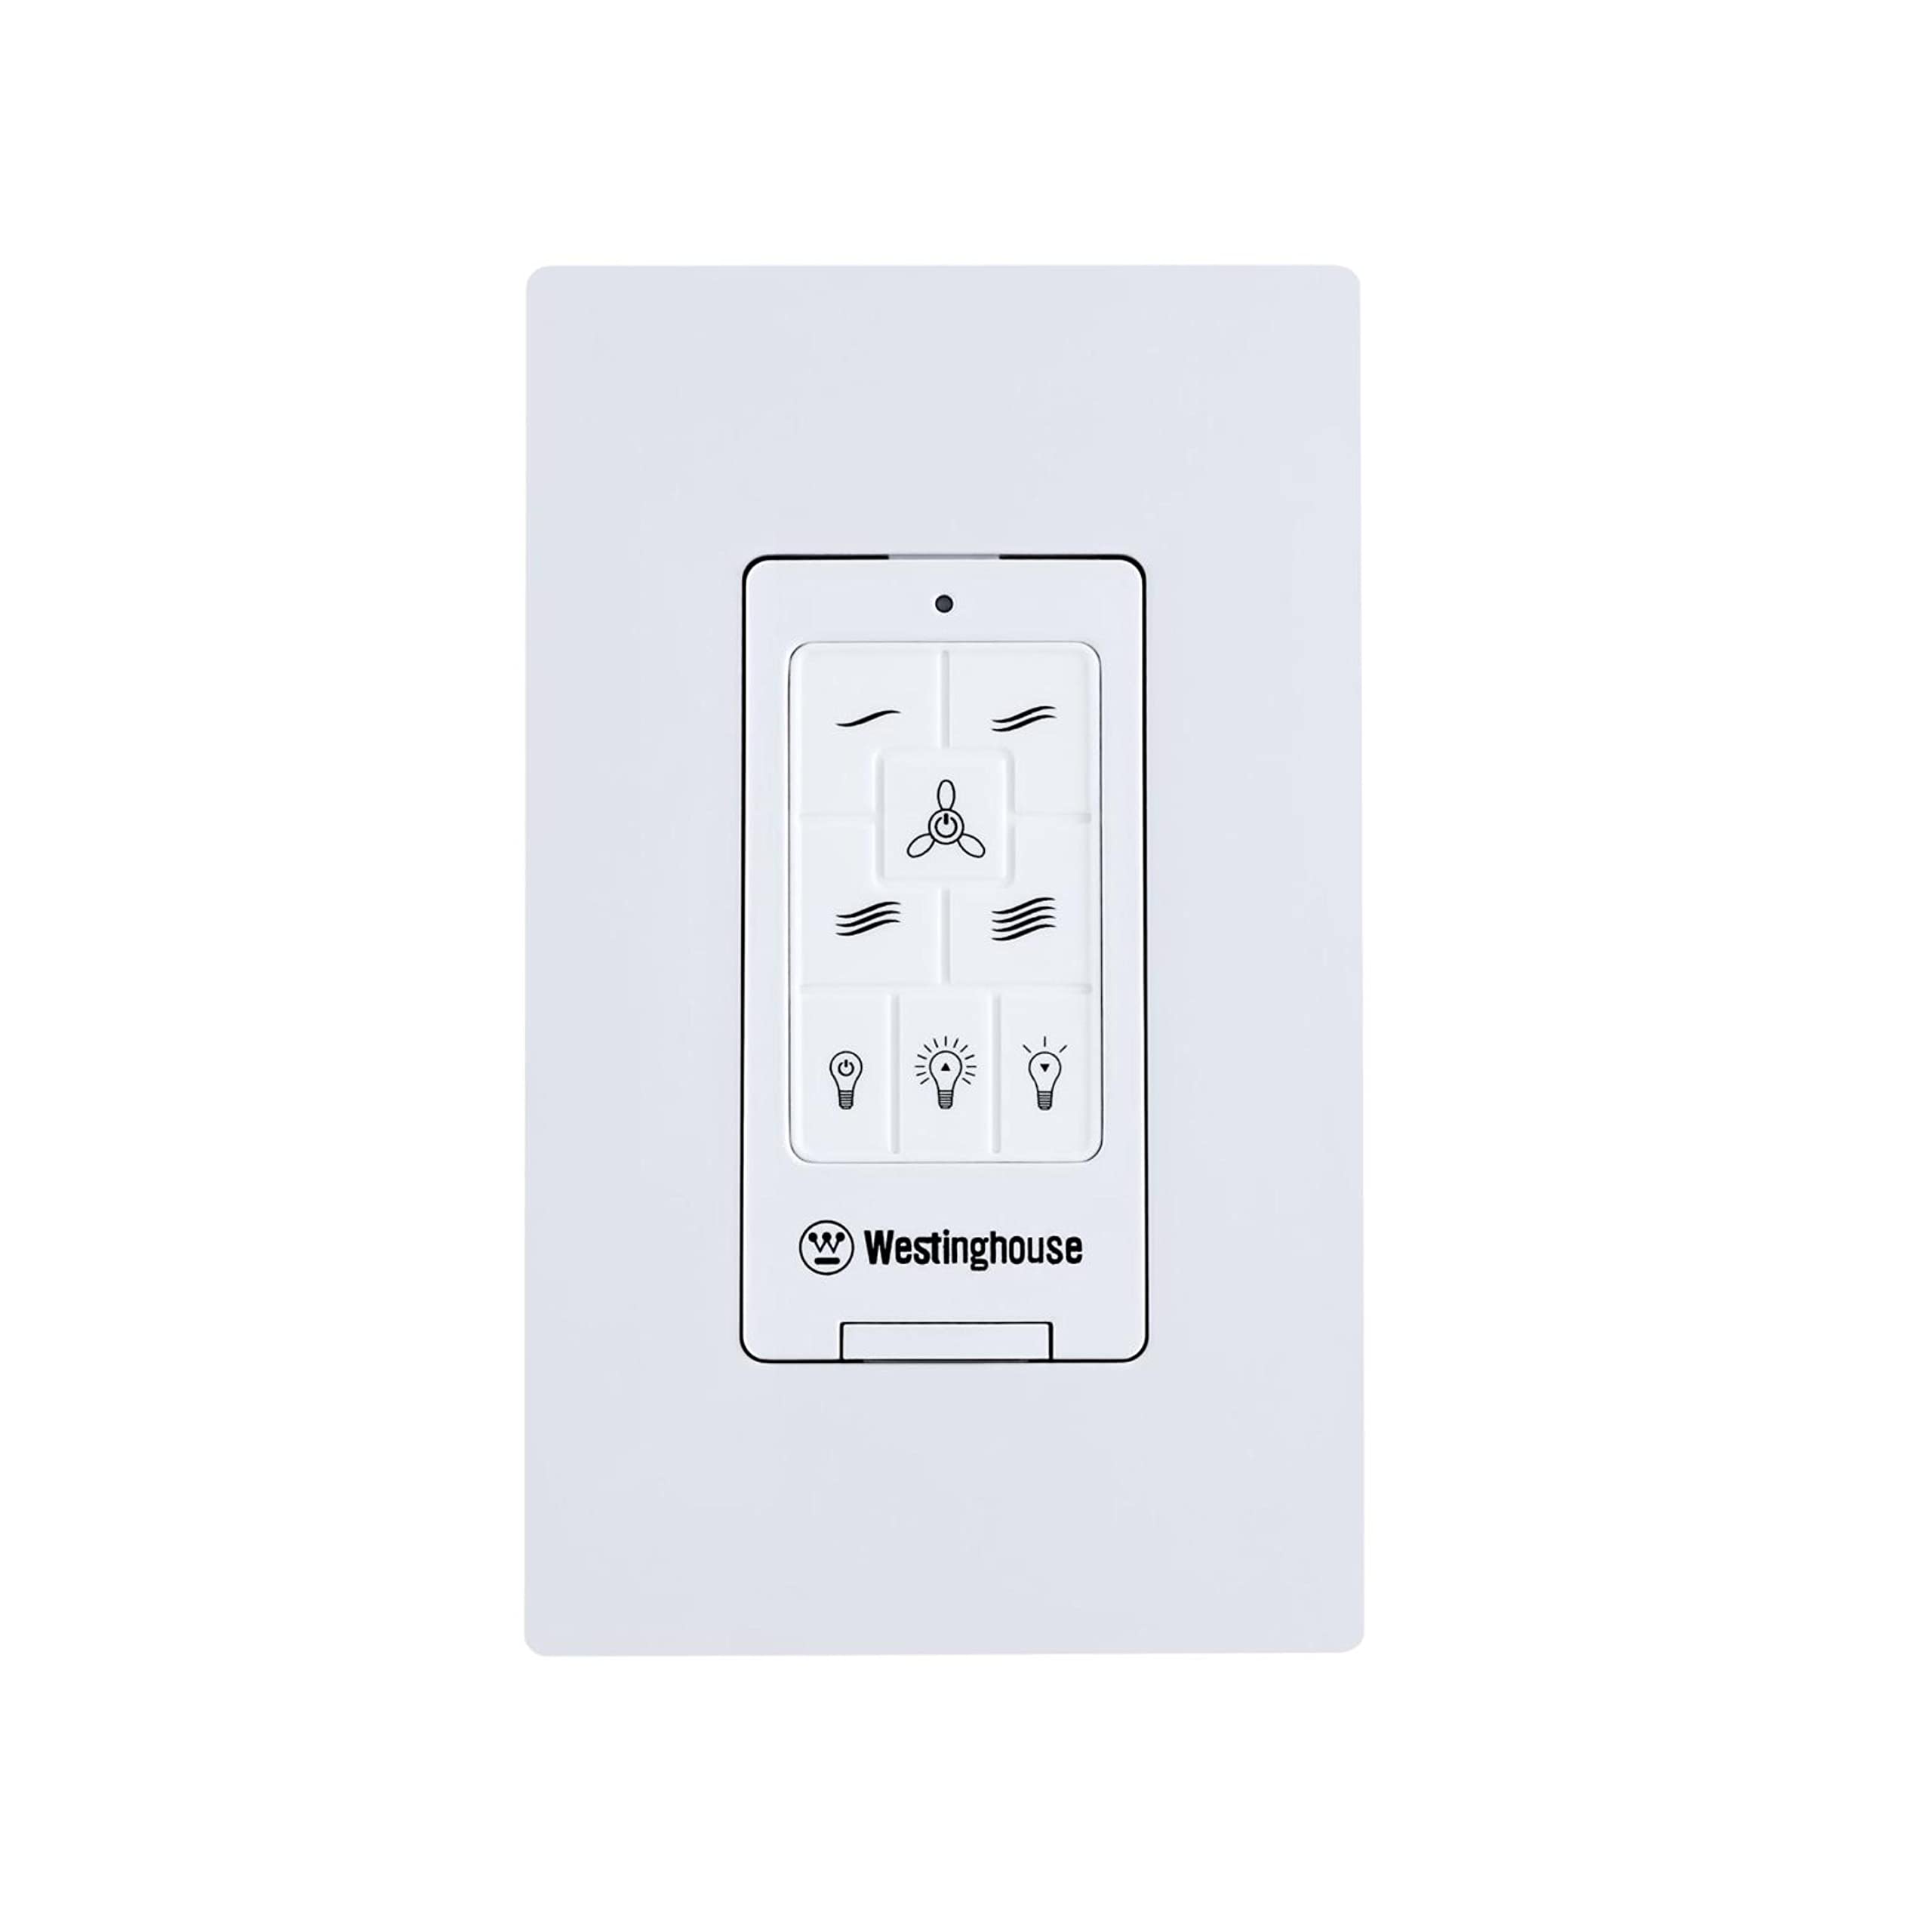 Westinghouse Lighting 7788500 Four Speed Ceiling Fan and LED Light Wall Control White